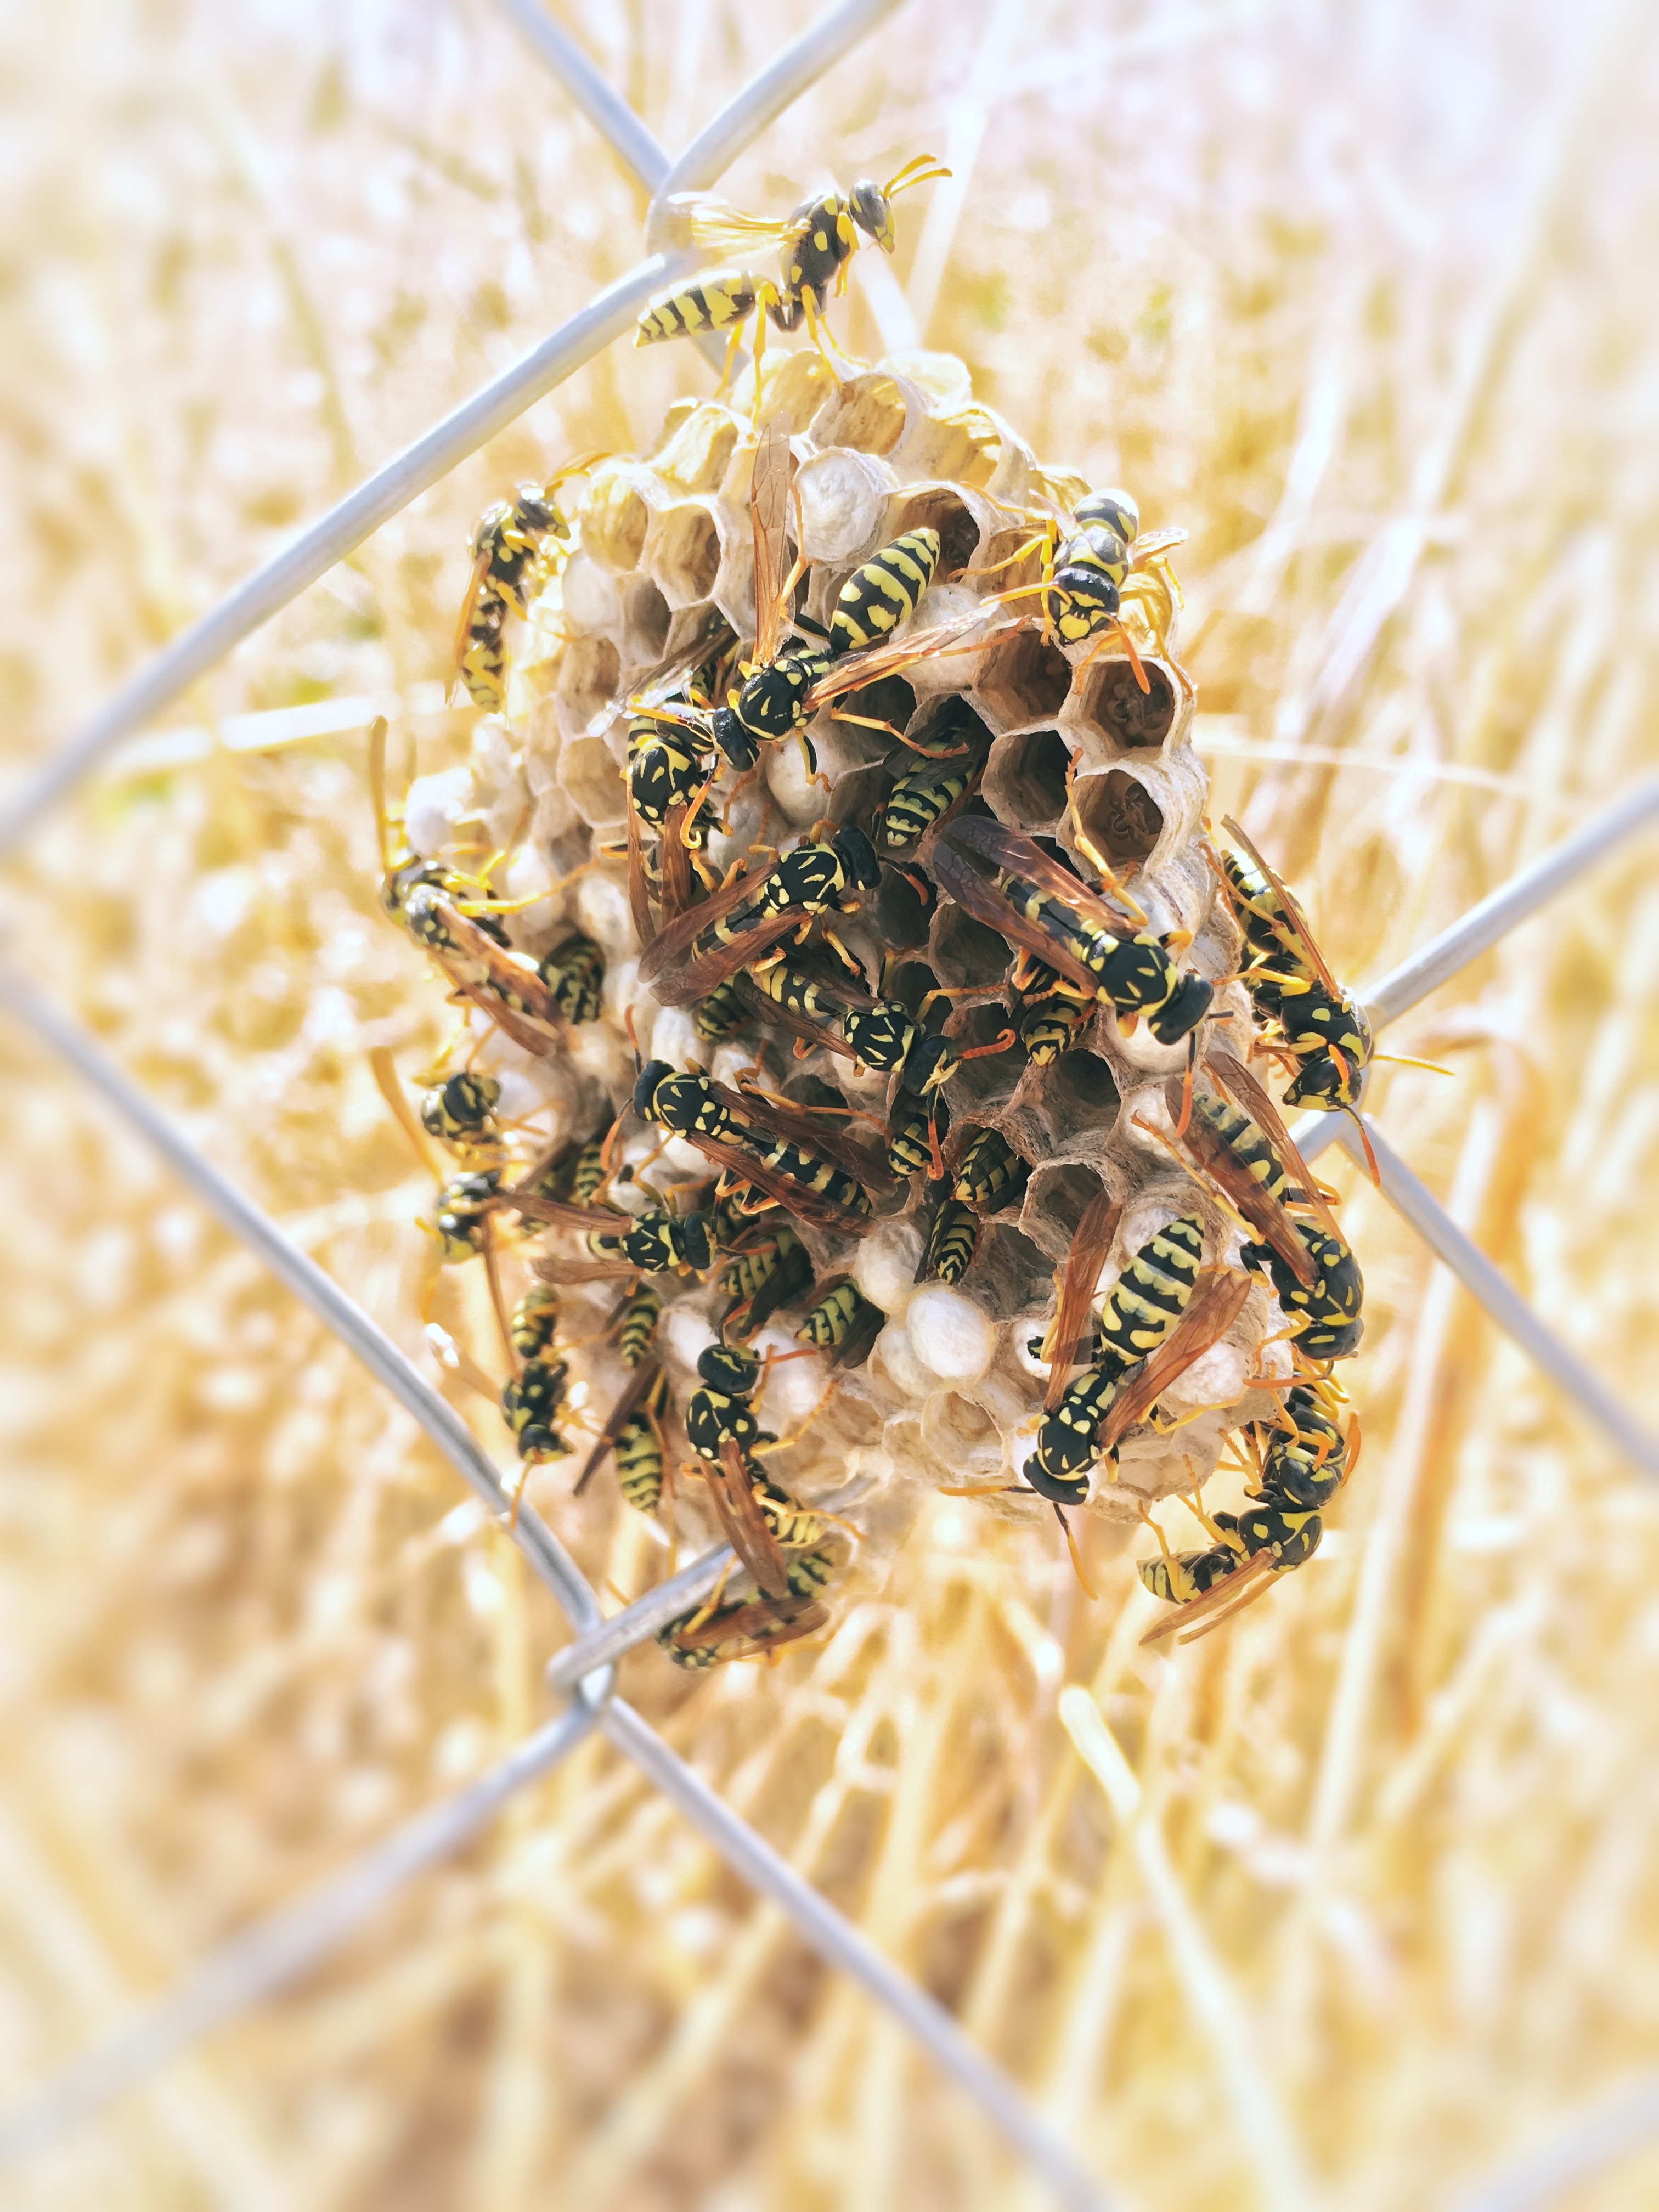 photograph of a wasps nest